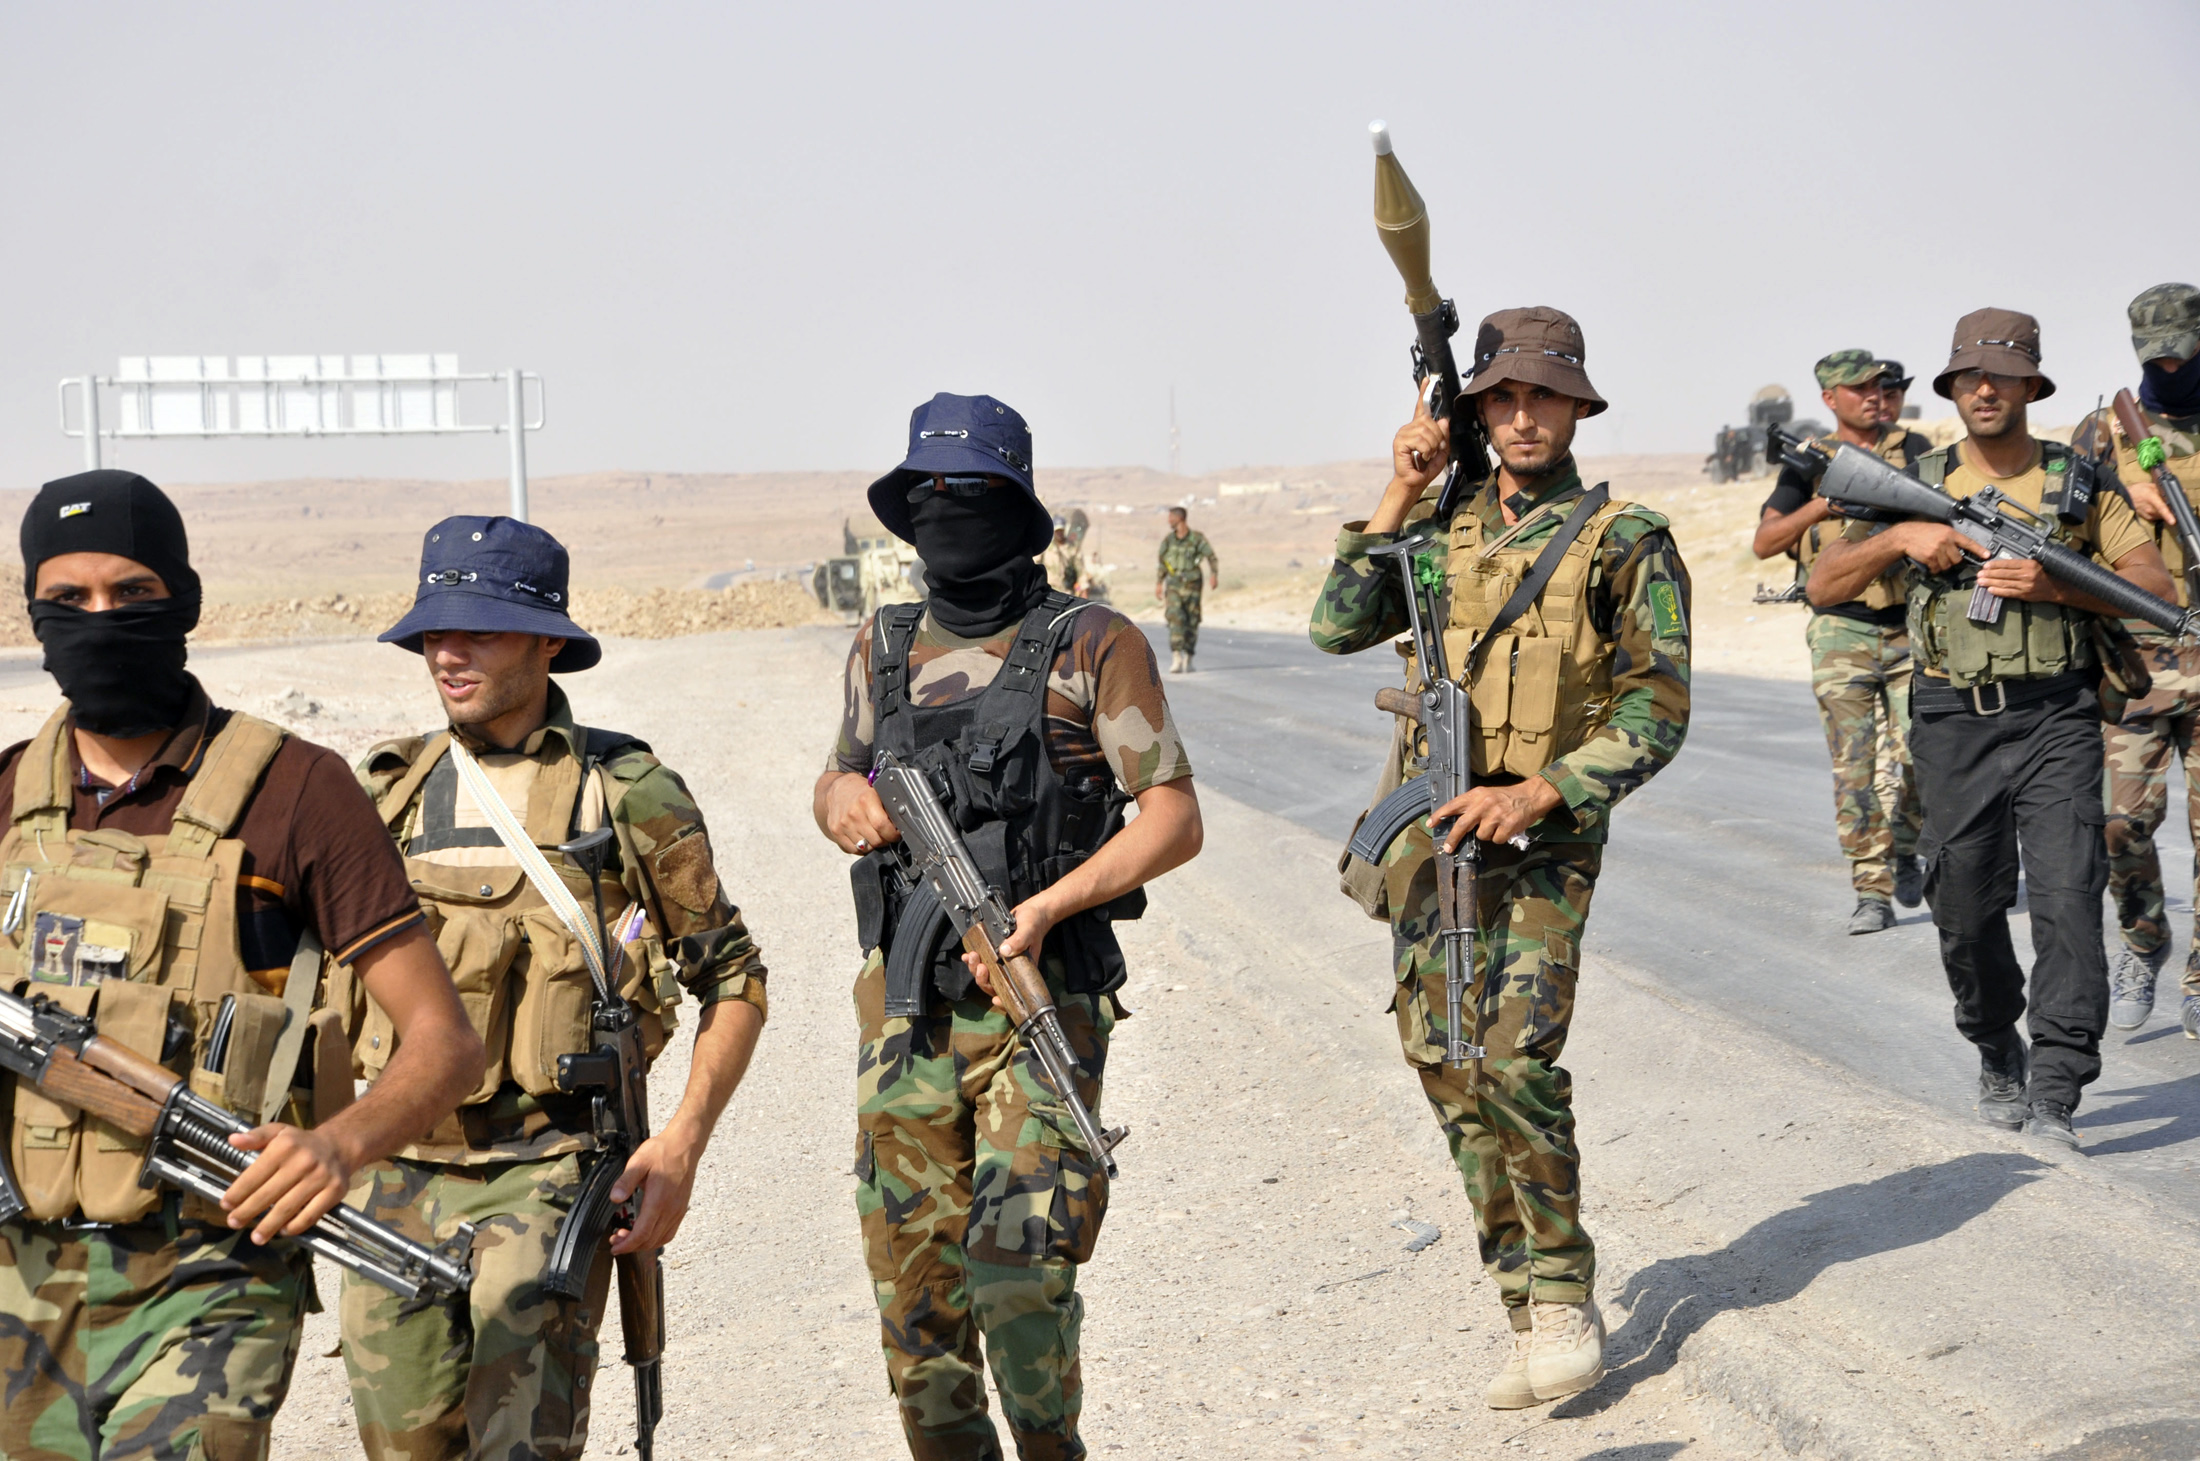 Iraqi security forces and Shi'ite militias advance towards town of Amerli from their position in the Ajana